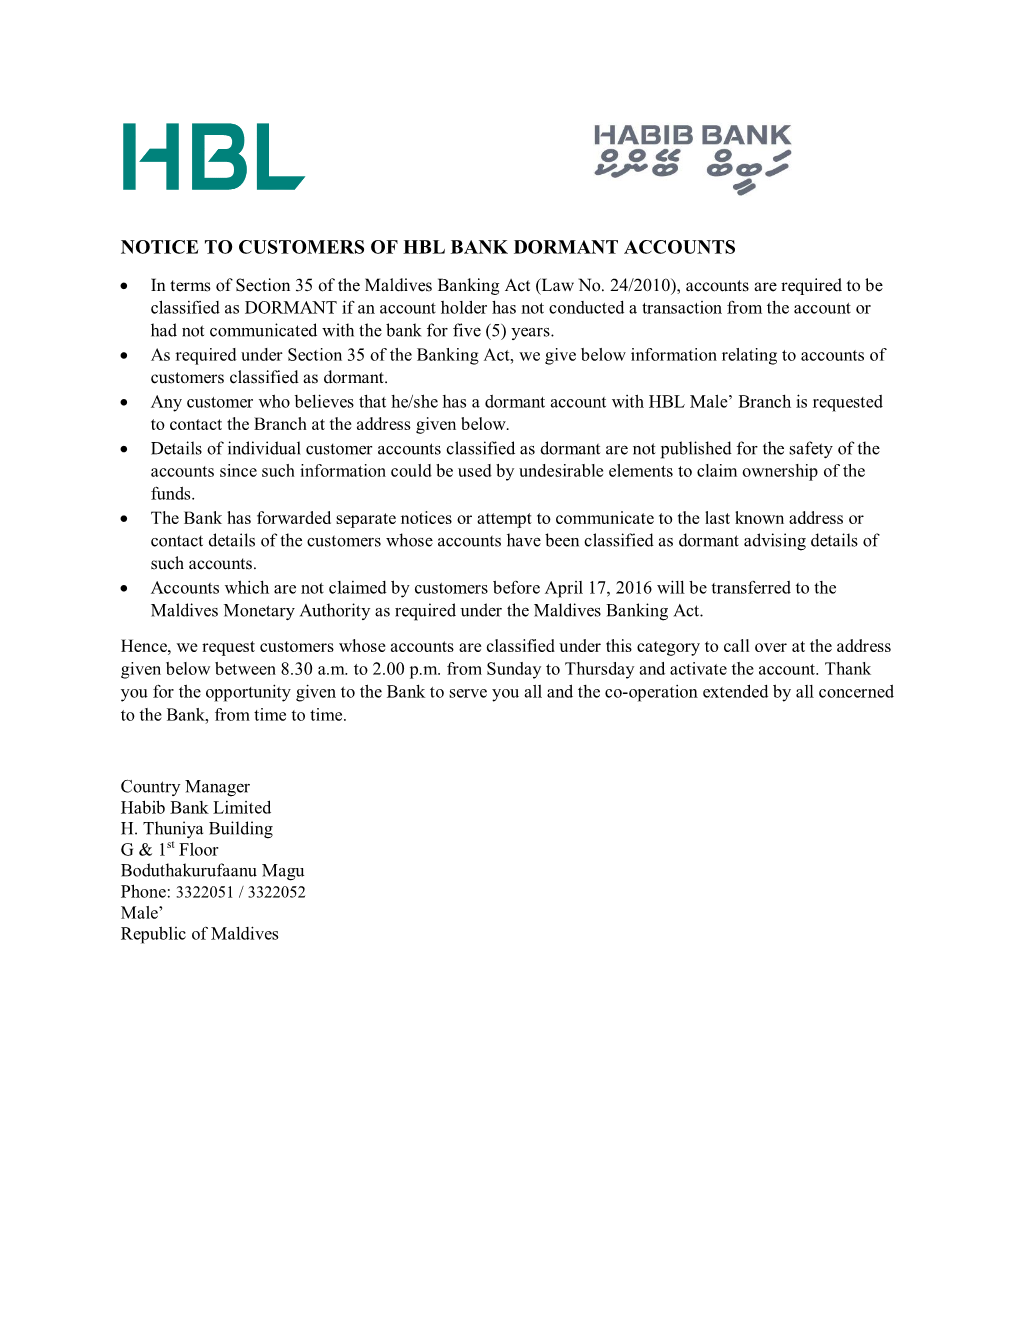 Notice to Customers of Hbl Bank Dormant Accounts